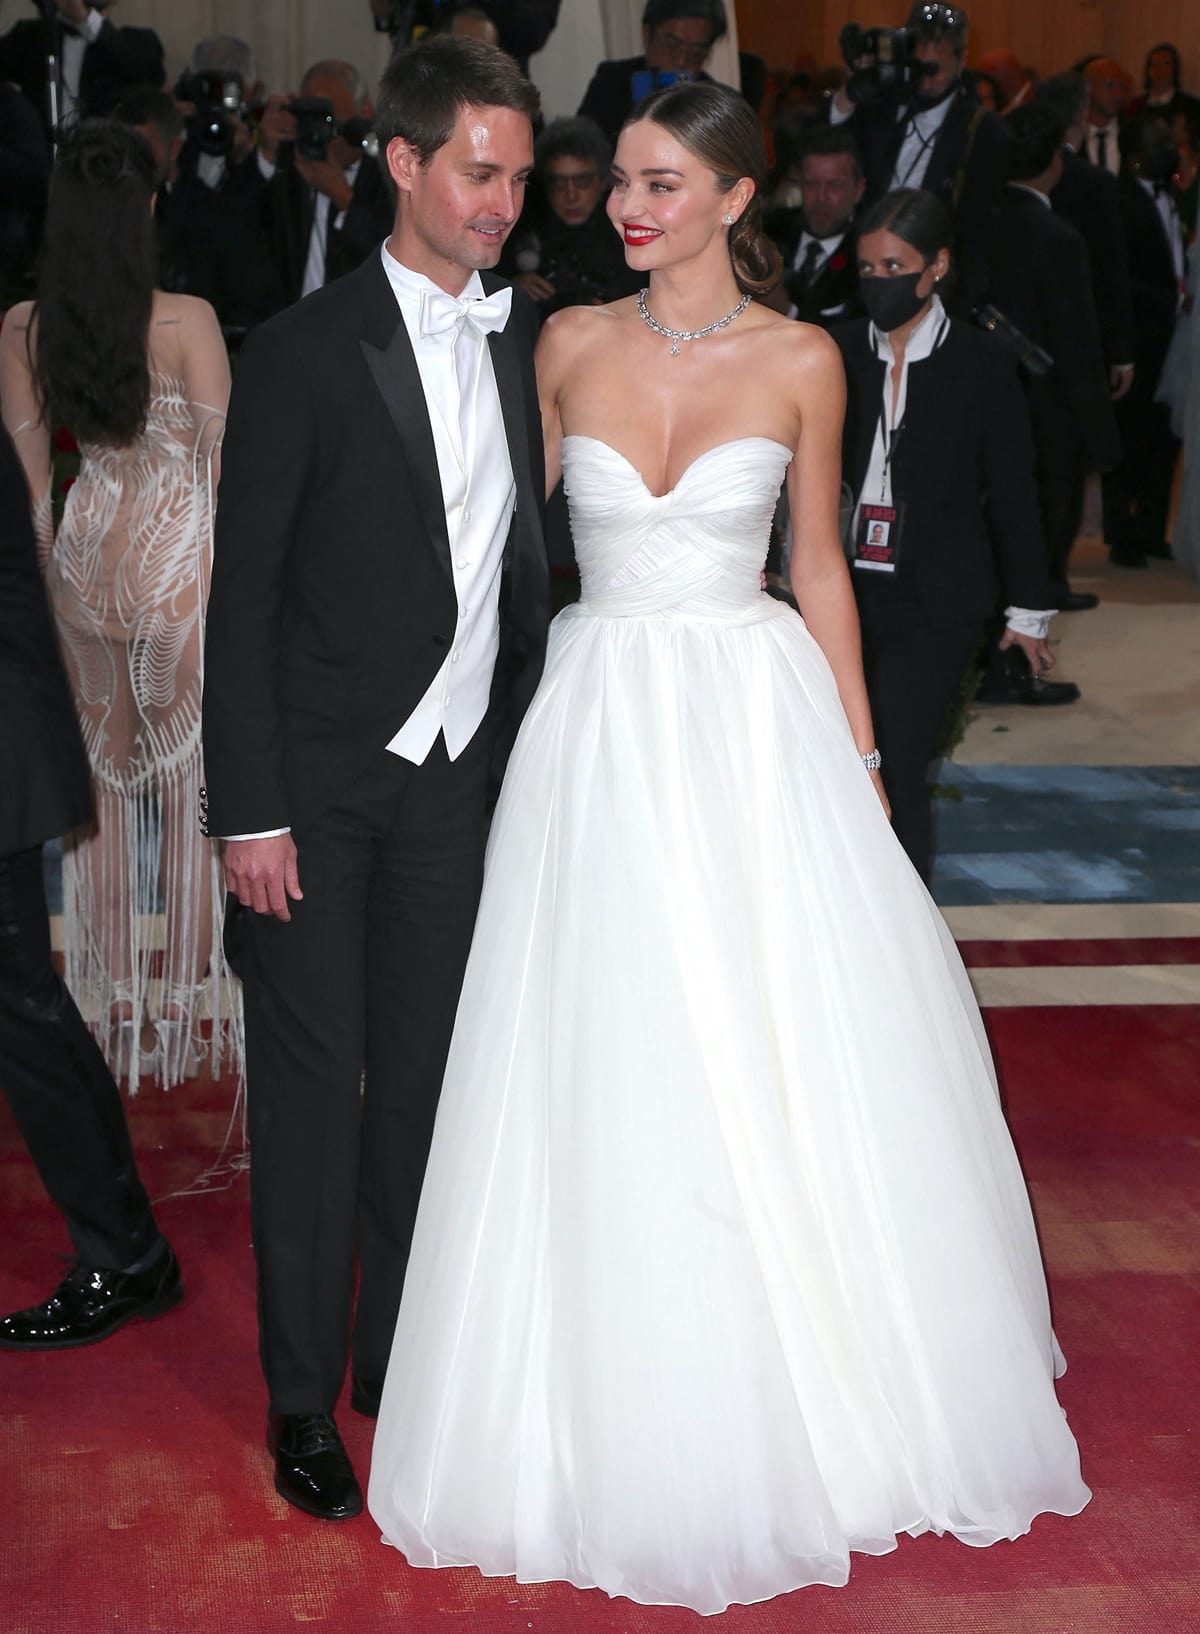 Miranda Kerr in a custom Oscar de la Renta strapless dress styled with Bvlgari jewelry and her husband Evan Spiegel hit the red carpet together at the 2022 Met Gala